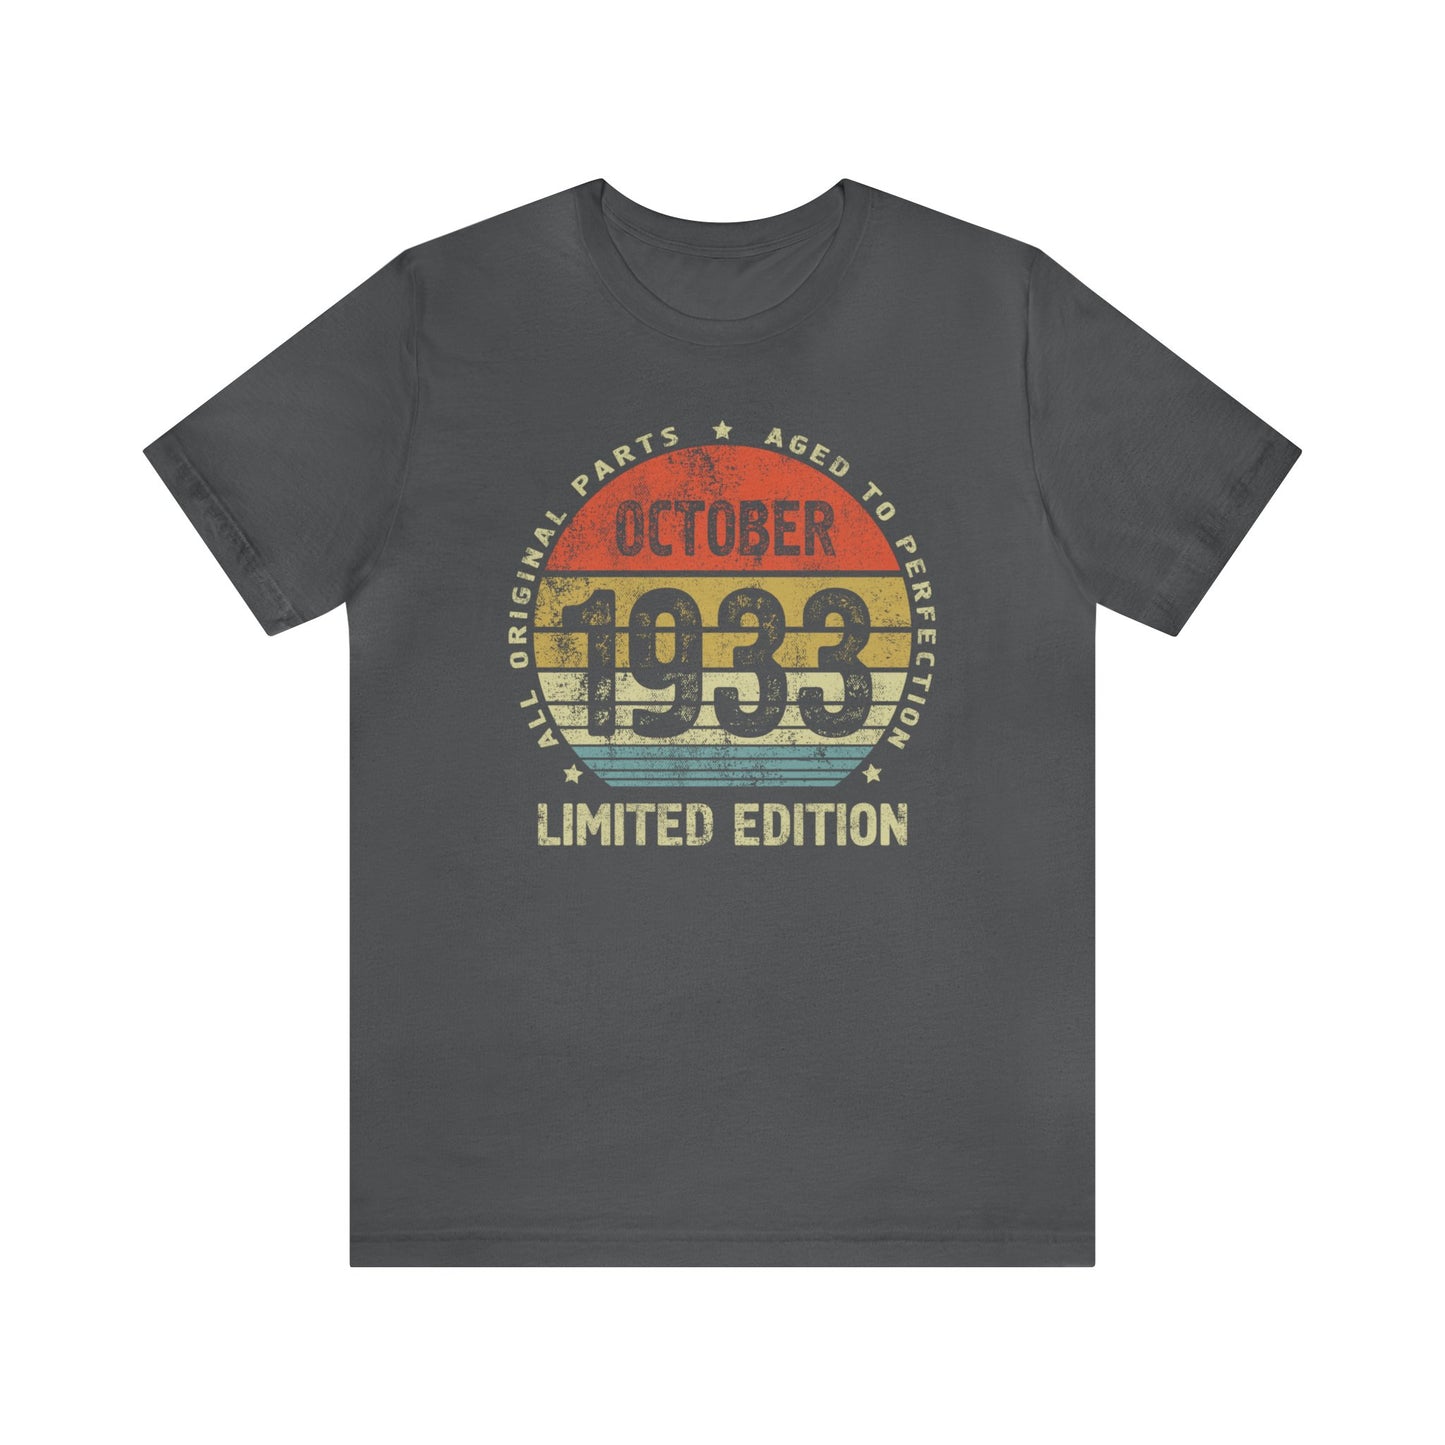 90th birthday shirt for men or women October 1933 birthday gift for wife or husband